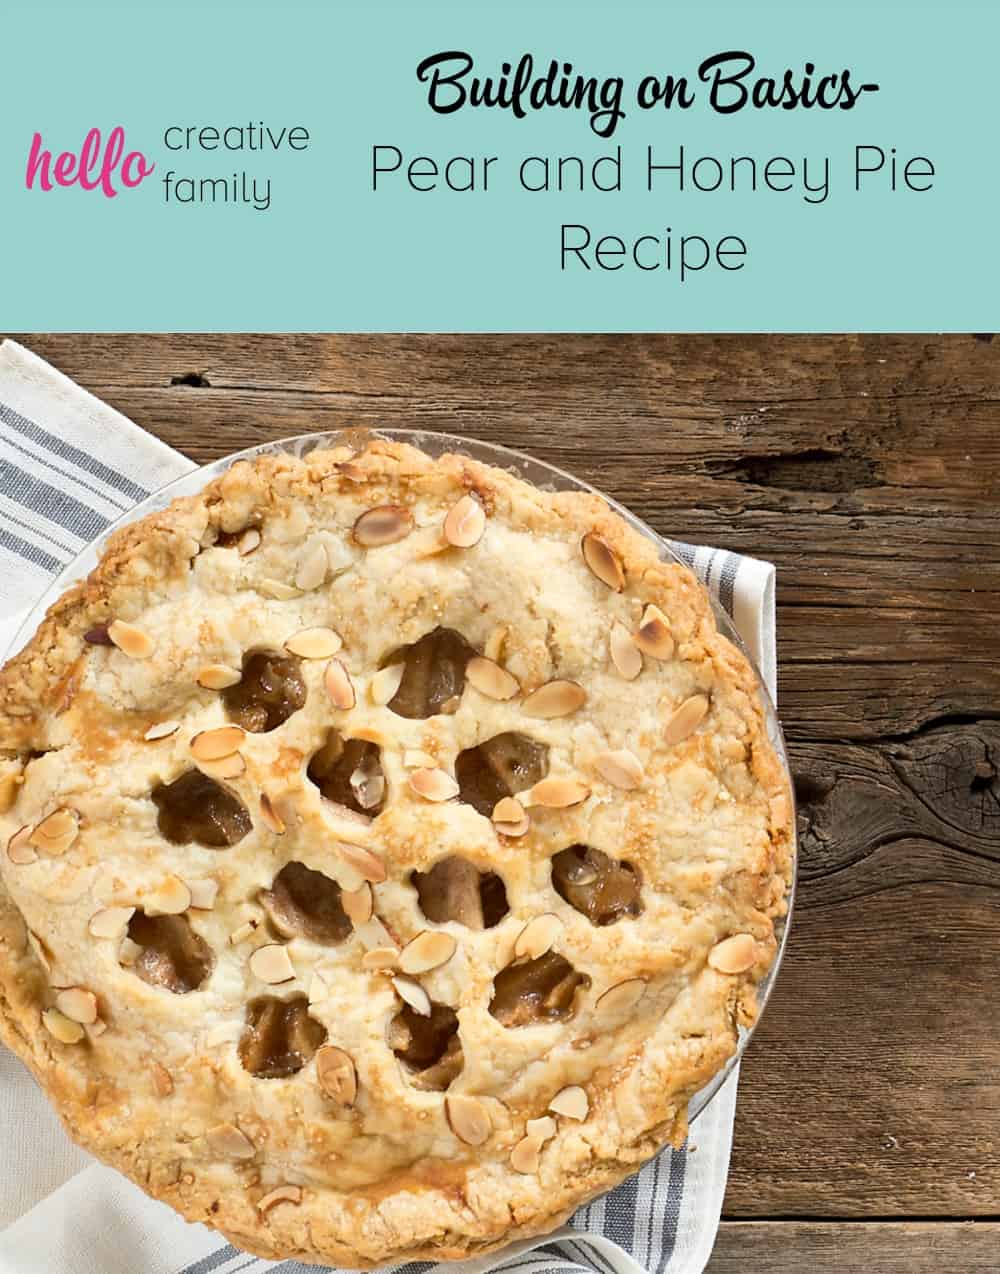 Pear and honey pie